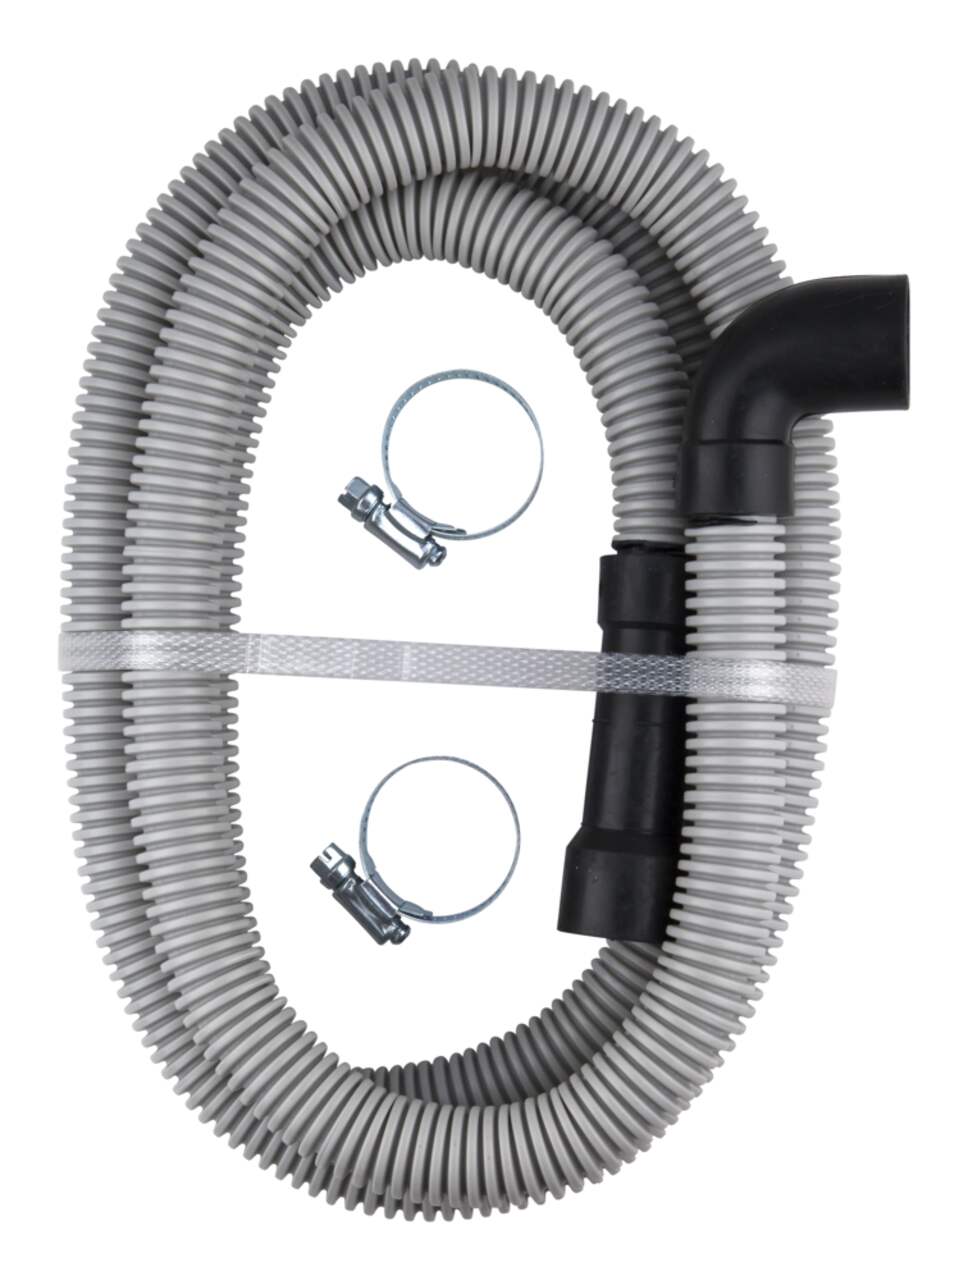 https://media-www.canadiantire.ca/product/fixing/plumbing/rough-plumbing/0632897/plumbshop-dishwasher-discharge-hose-8a719f18-8453-4611-8b99-af817263b337.png?imdensity=1&imwidth=640&impolicy=mZoom